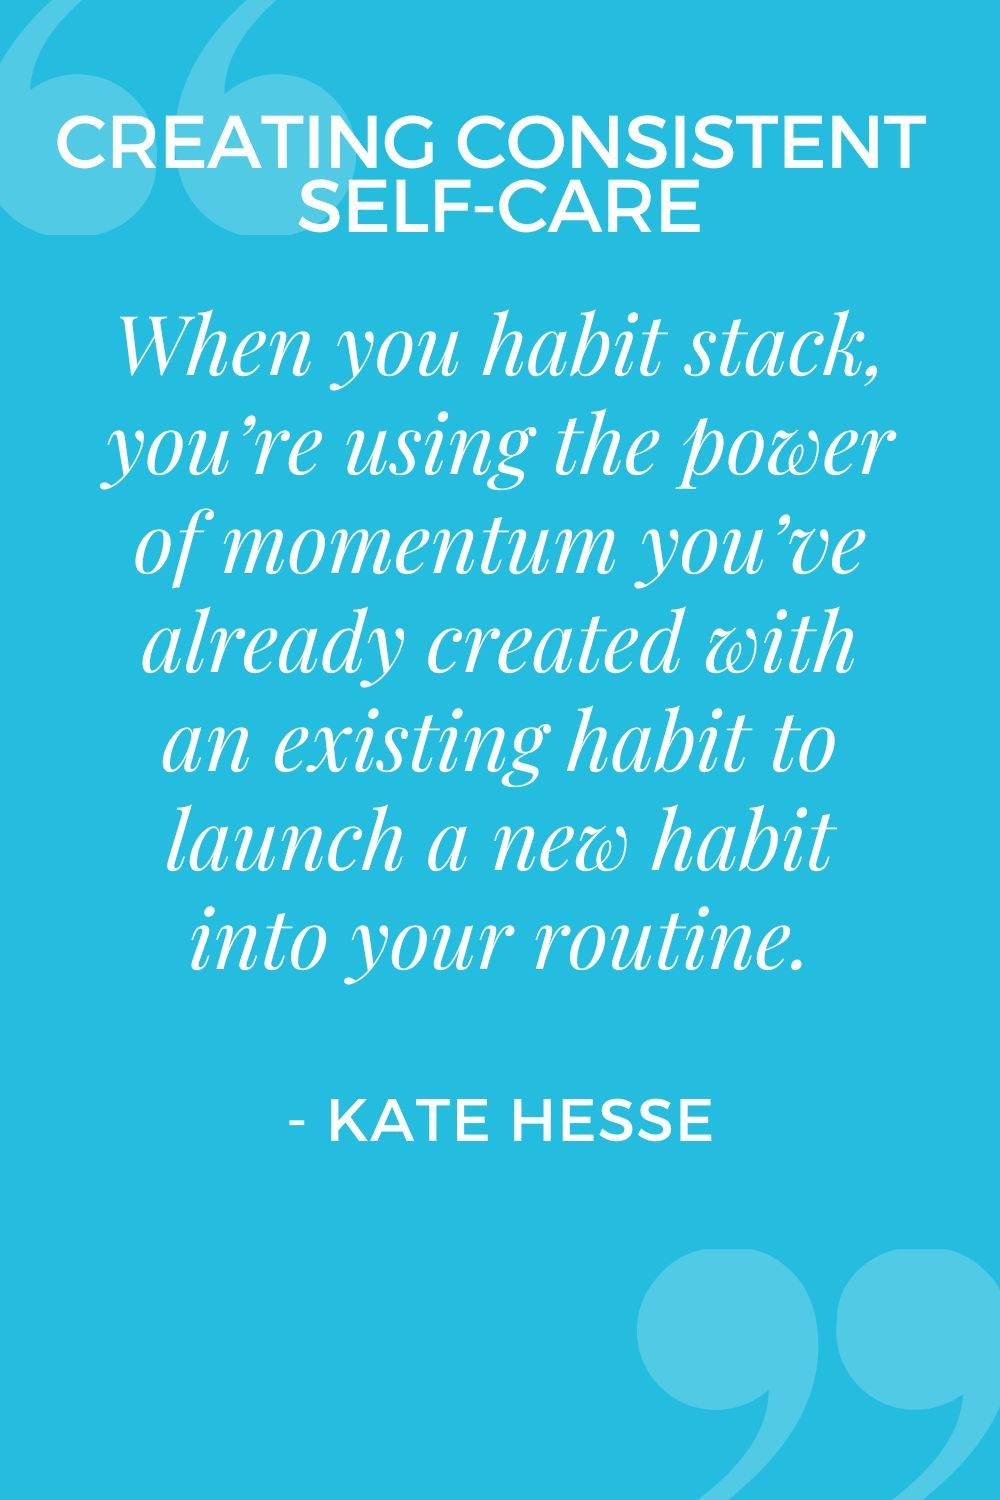 When you habit stack, you're using the power of momentum you've already created with an existing habit to launch a new habit into your routine.